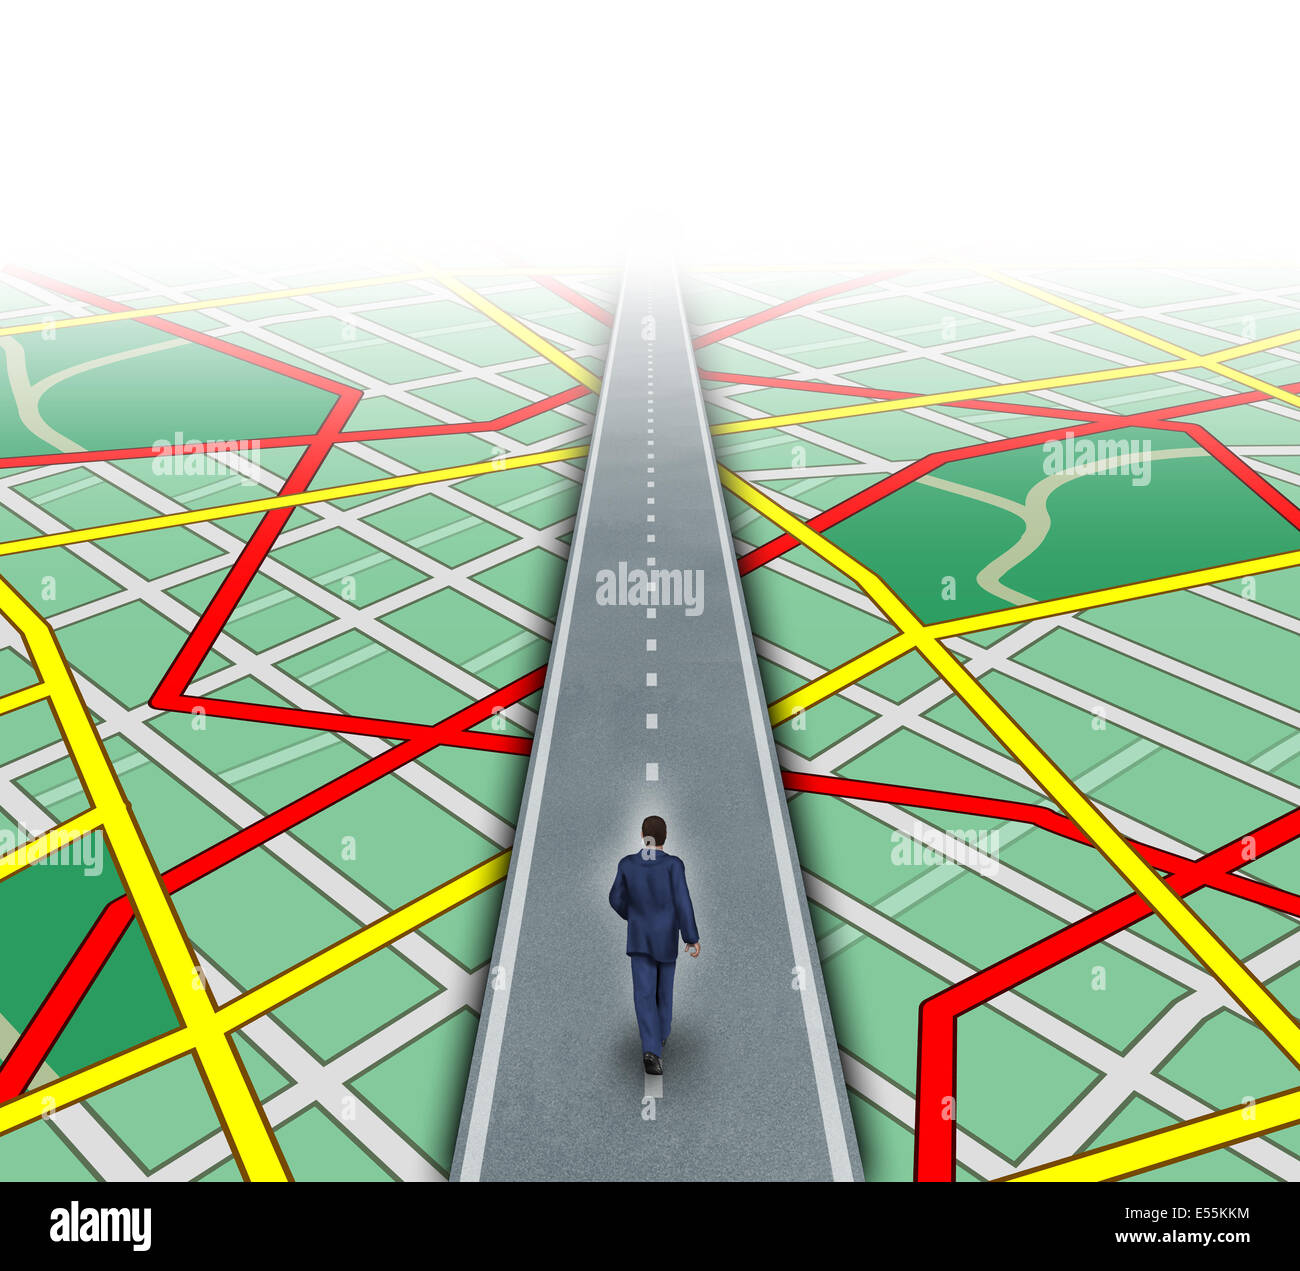 Alternate route and leadership solutions with a businessman walking through a complicated road map as a business focus concept of innovative thinking for financial success. Stock Photo